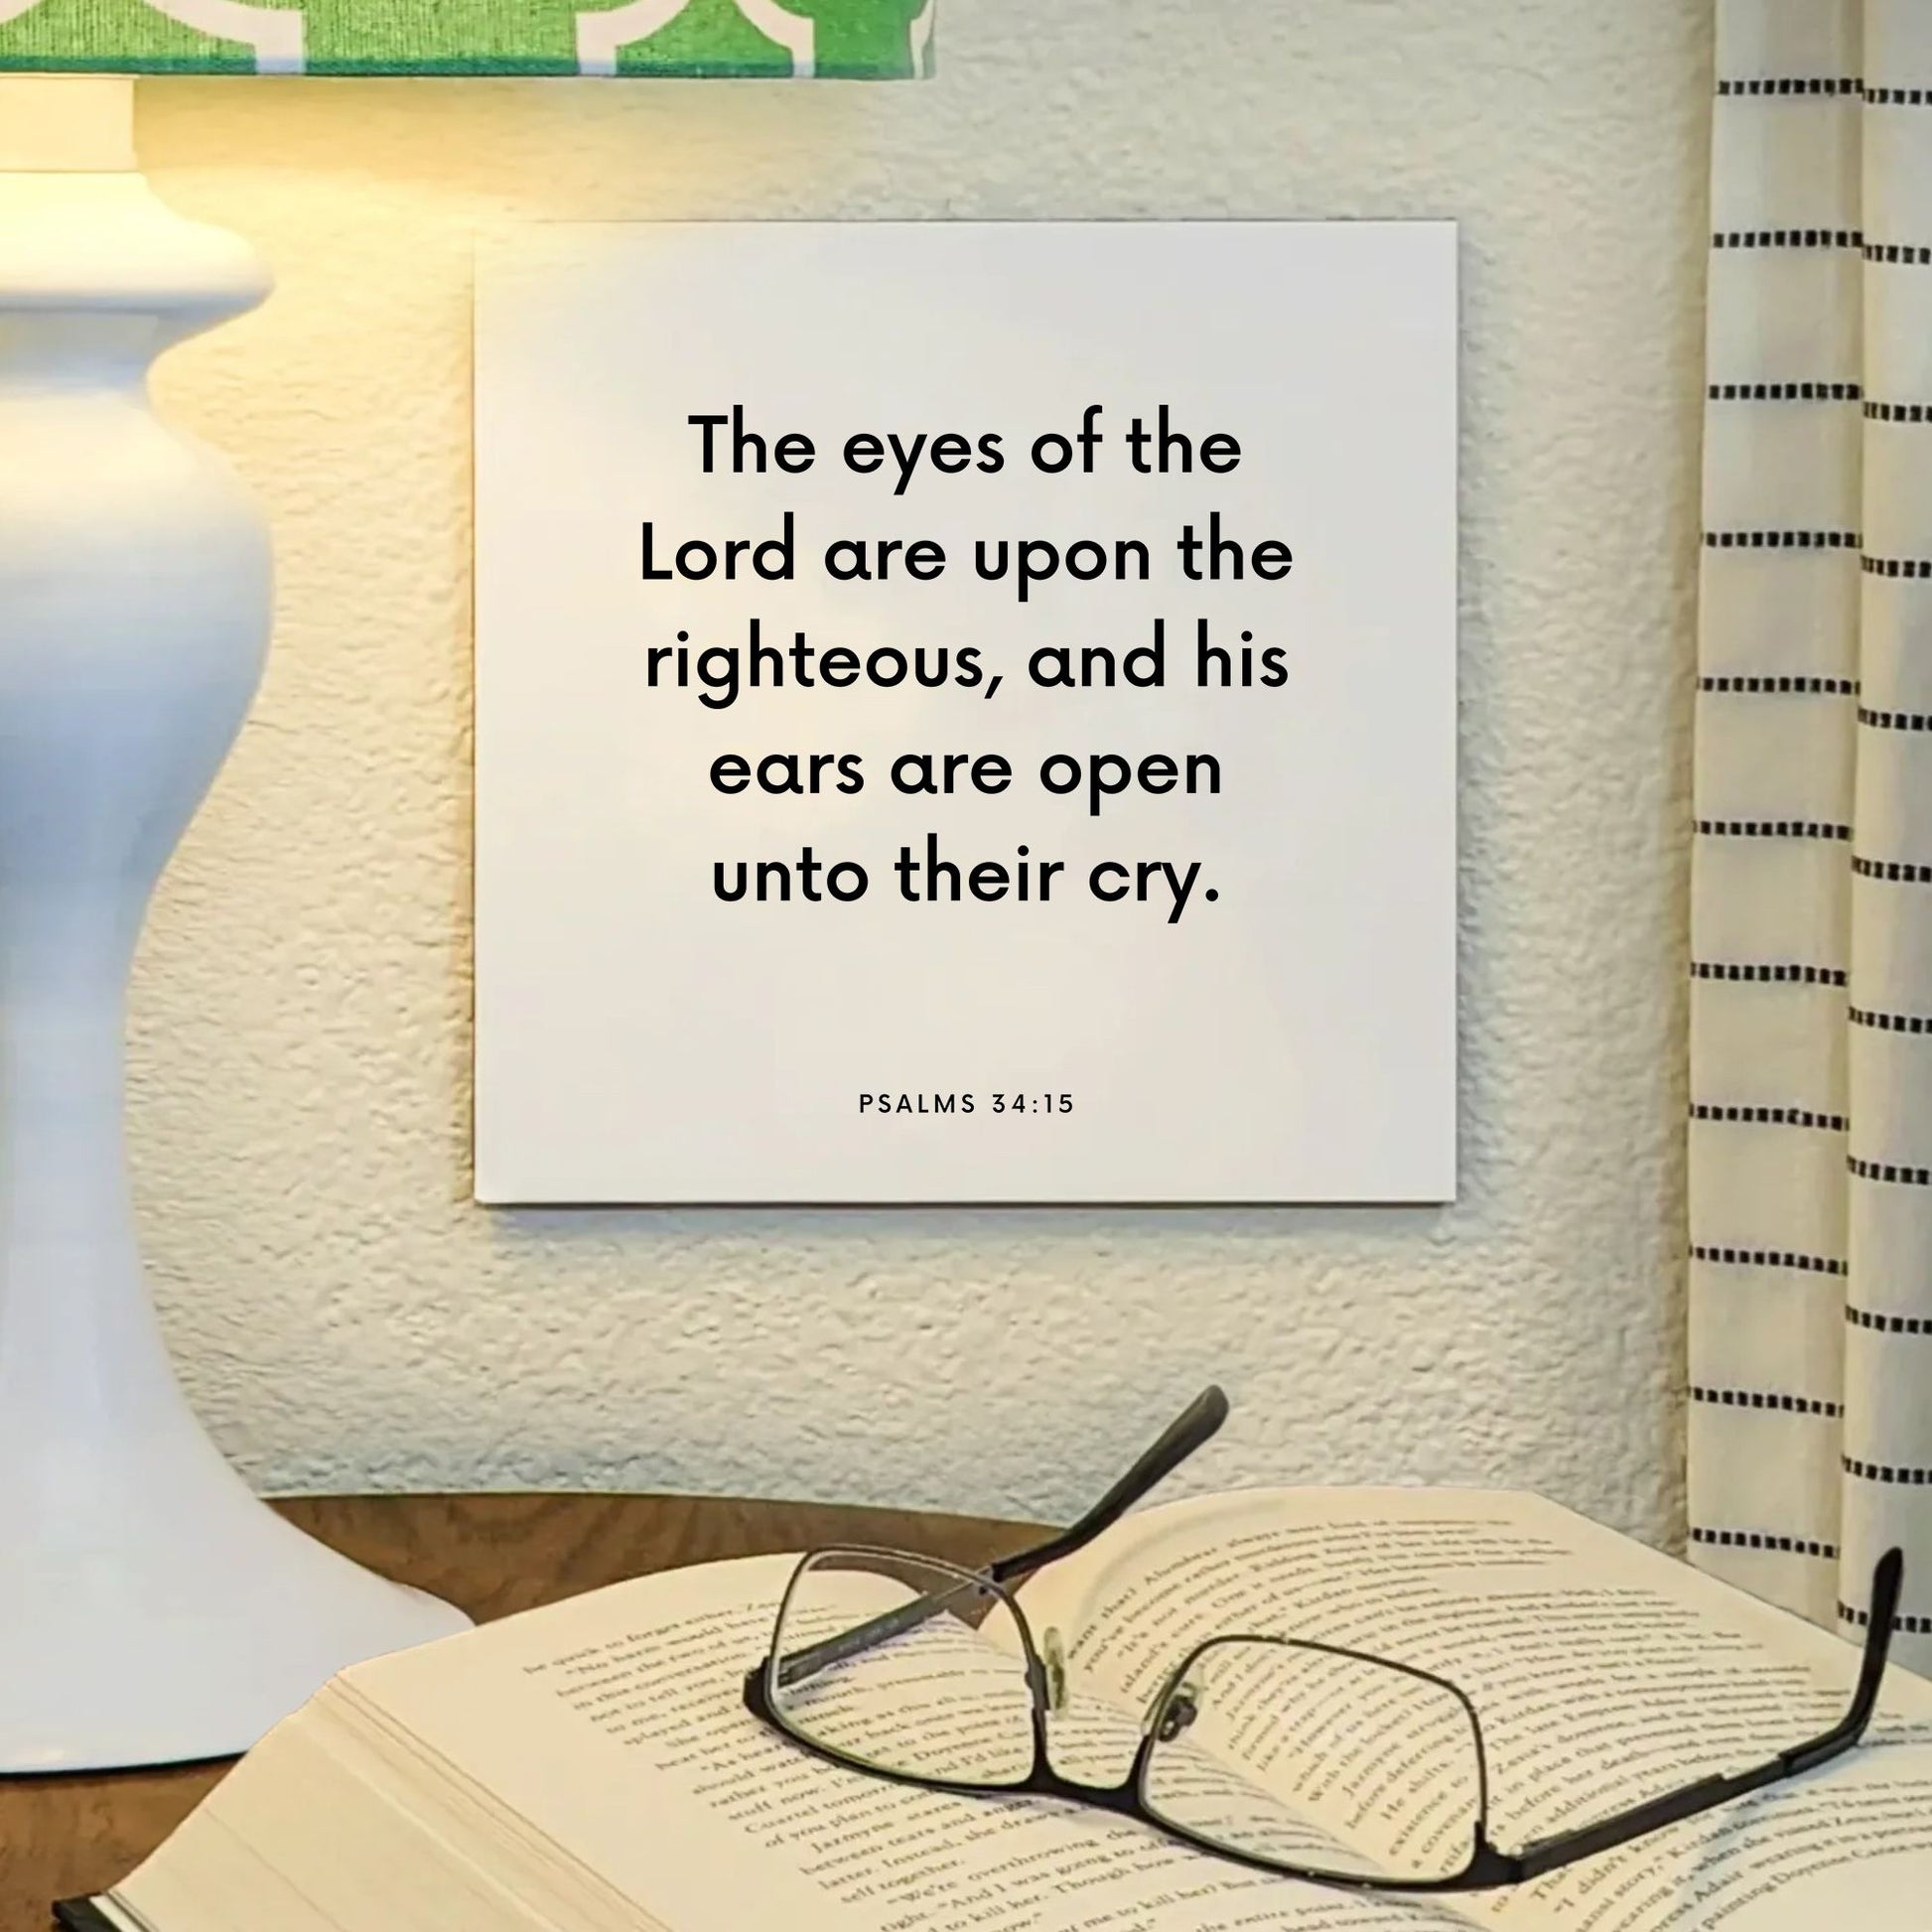 Lamp mouting of the scripture tile for Psalms 34:15 - "The eyes of the Lord are upon the righteous"